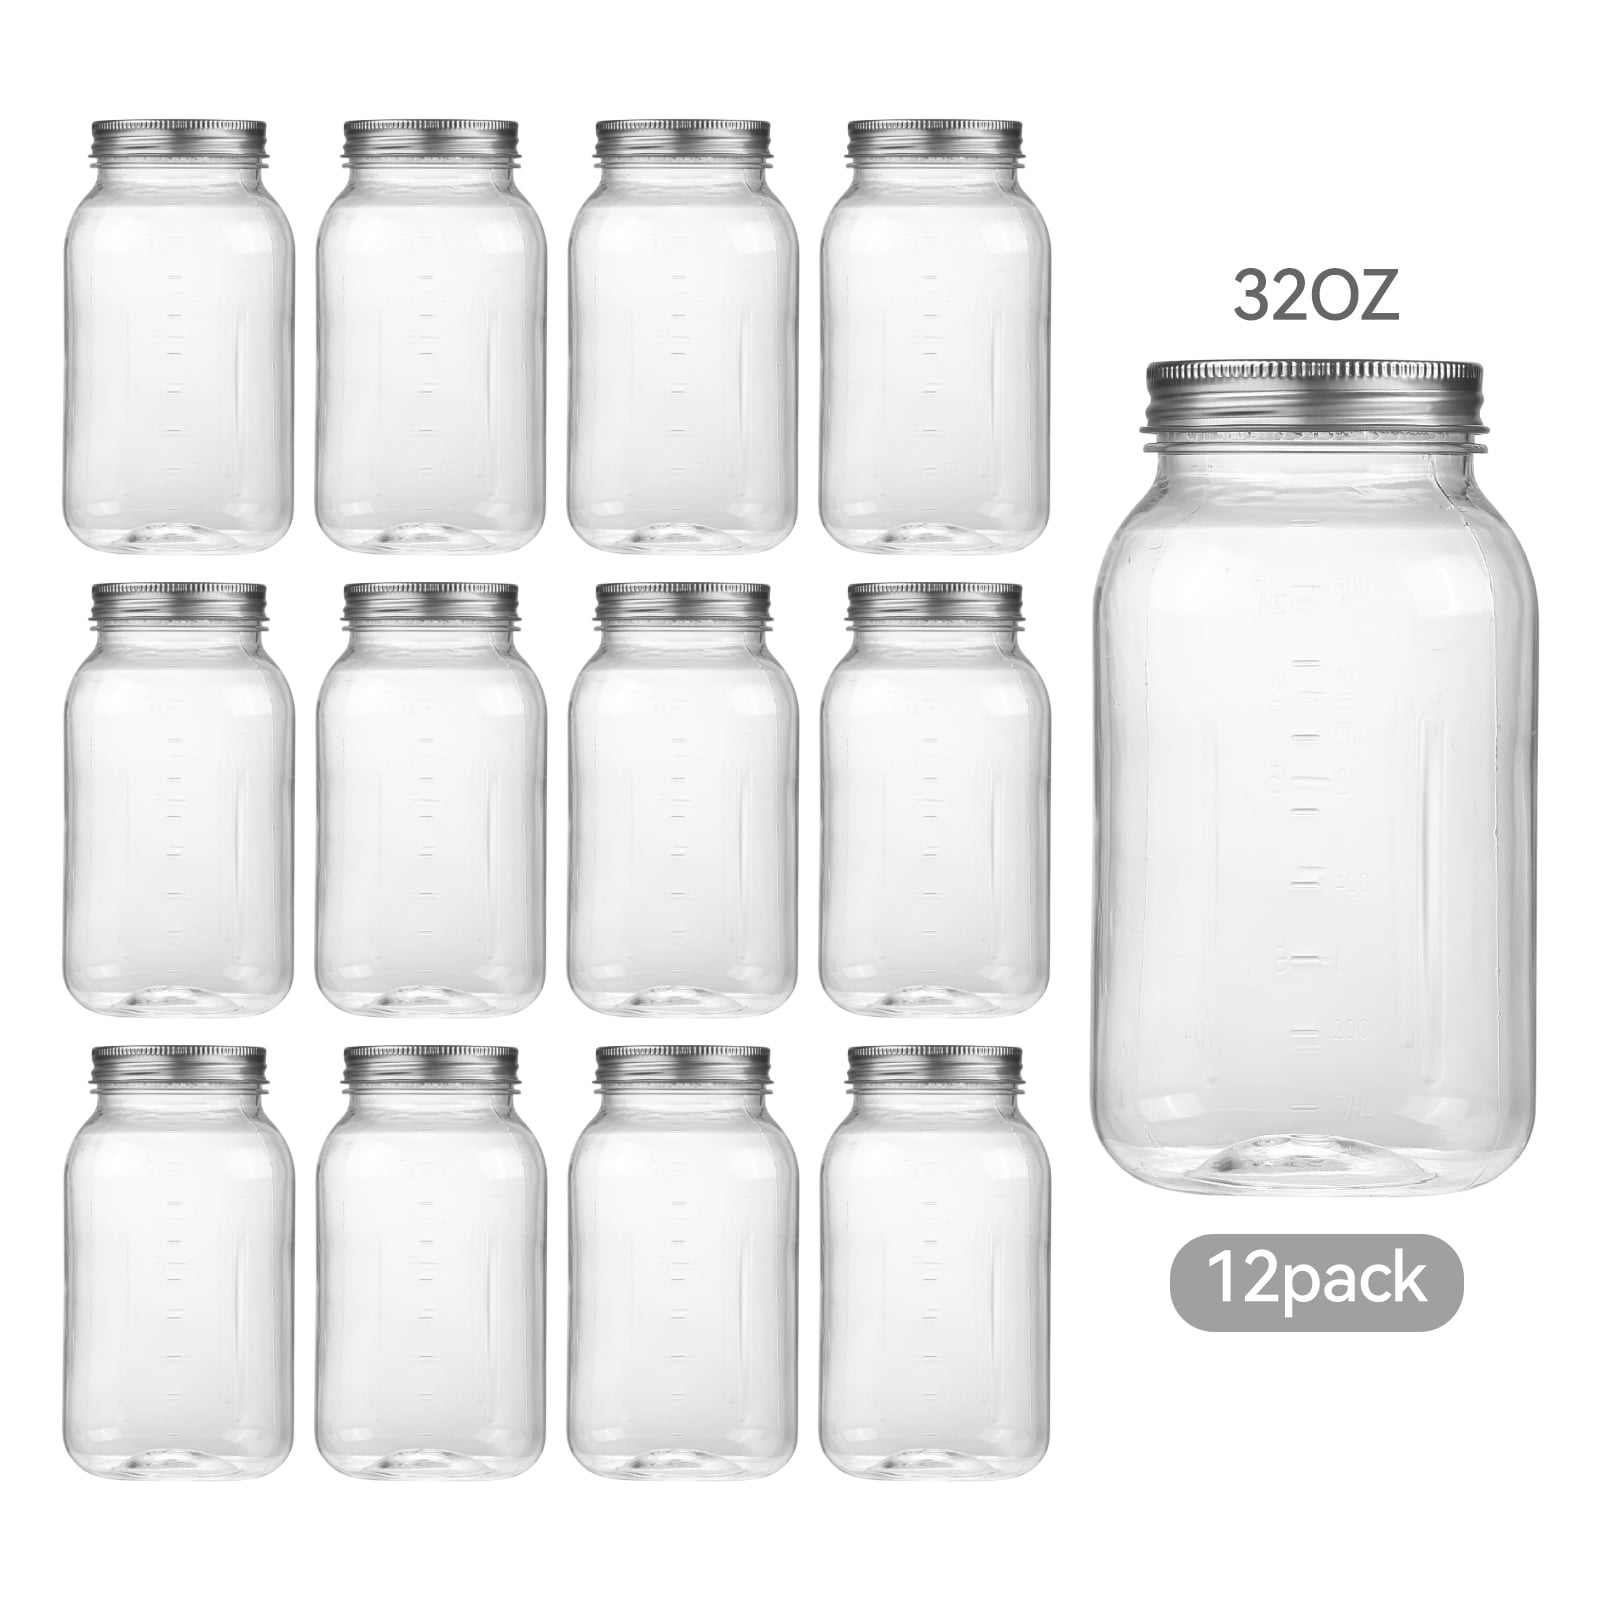 Novelinks 32oz Plastic Jars with Lids 12 Pack Clear Containers Airtight ...